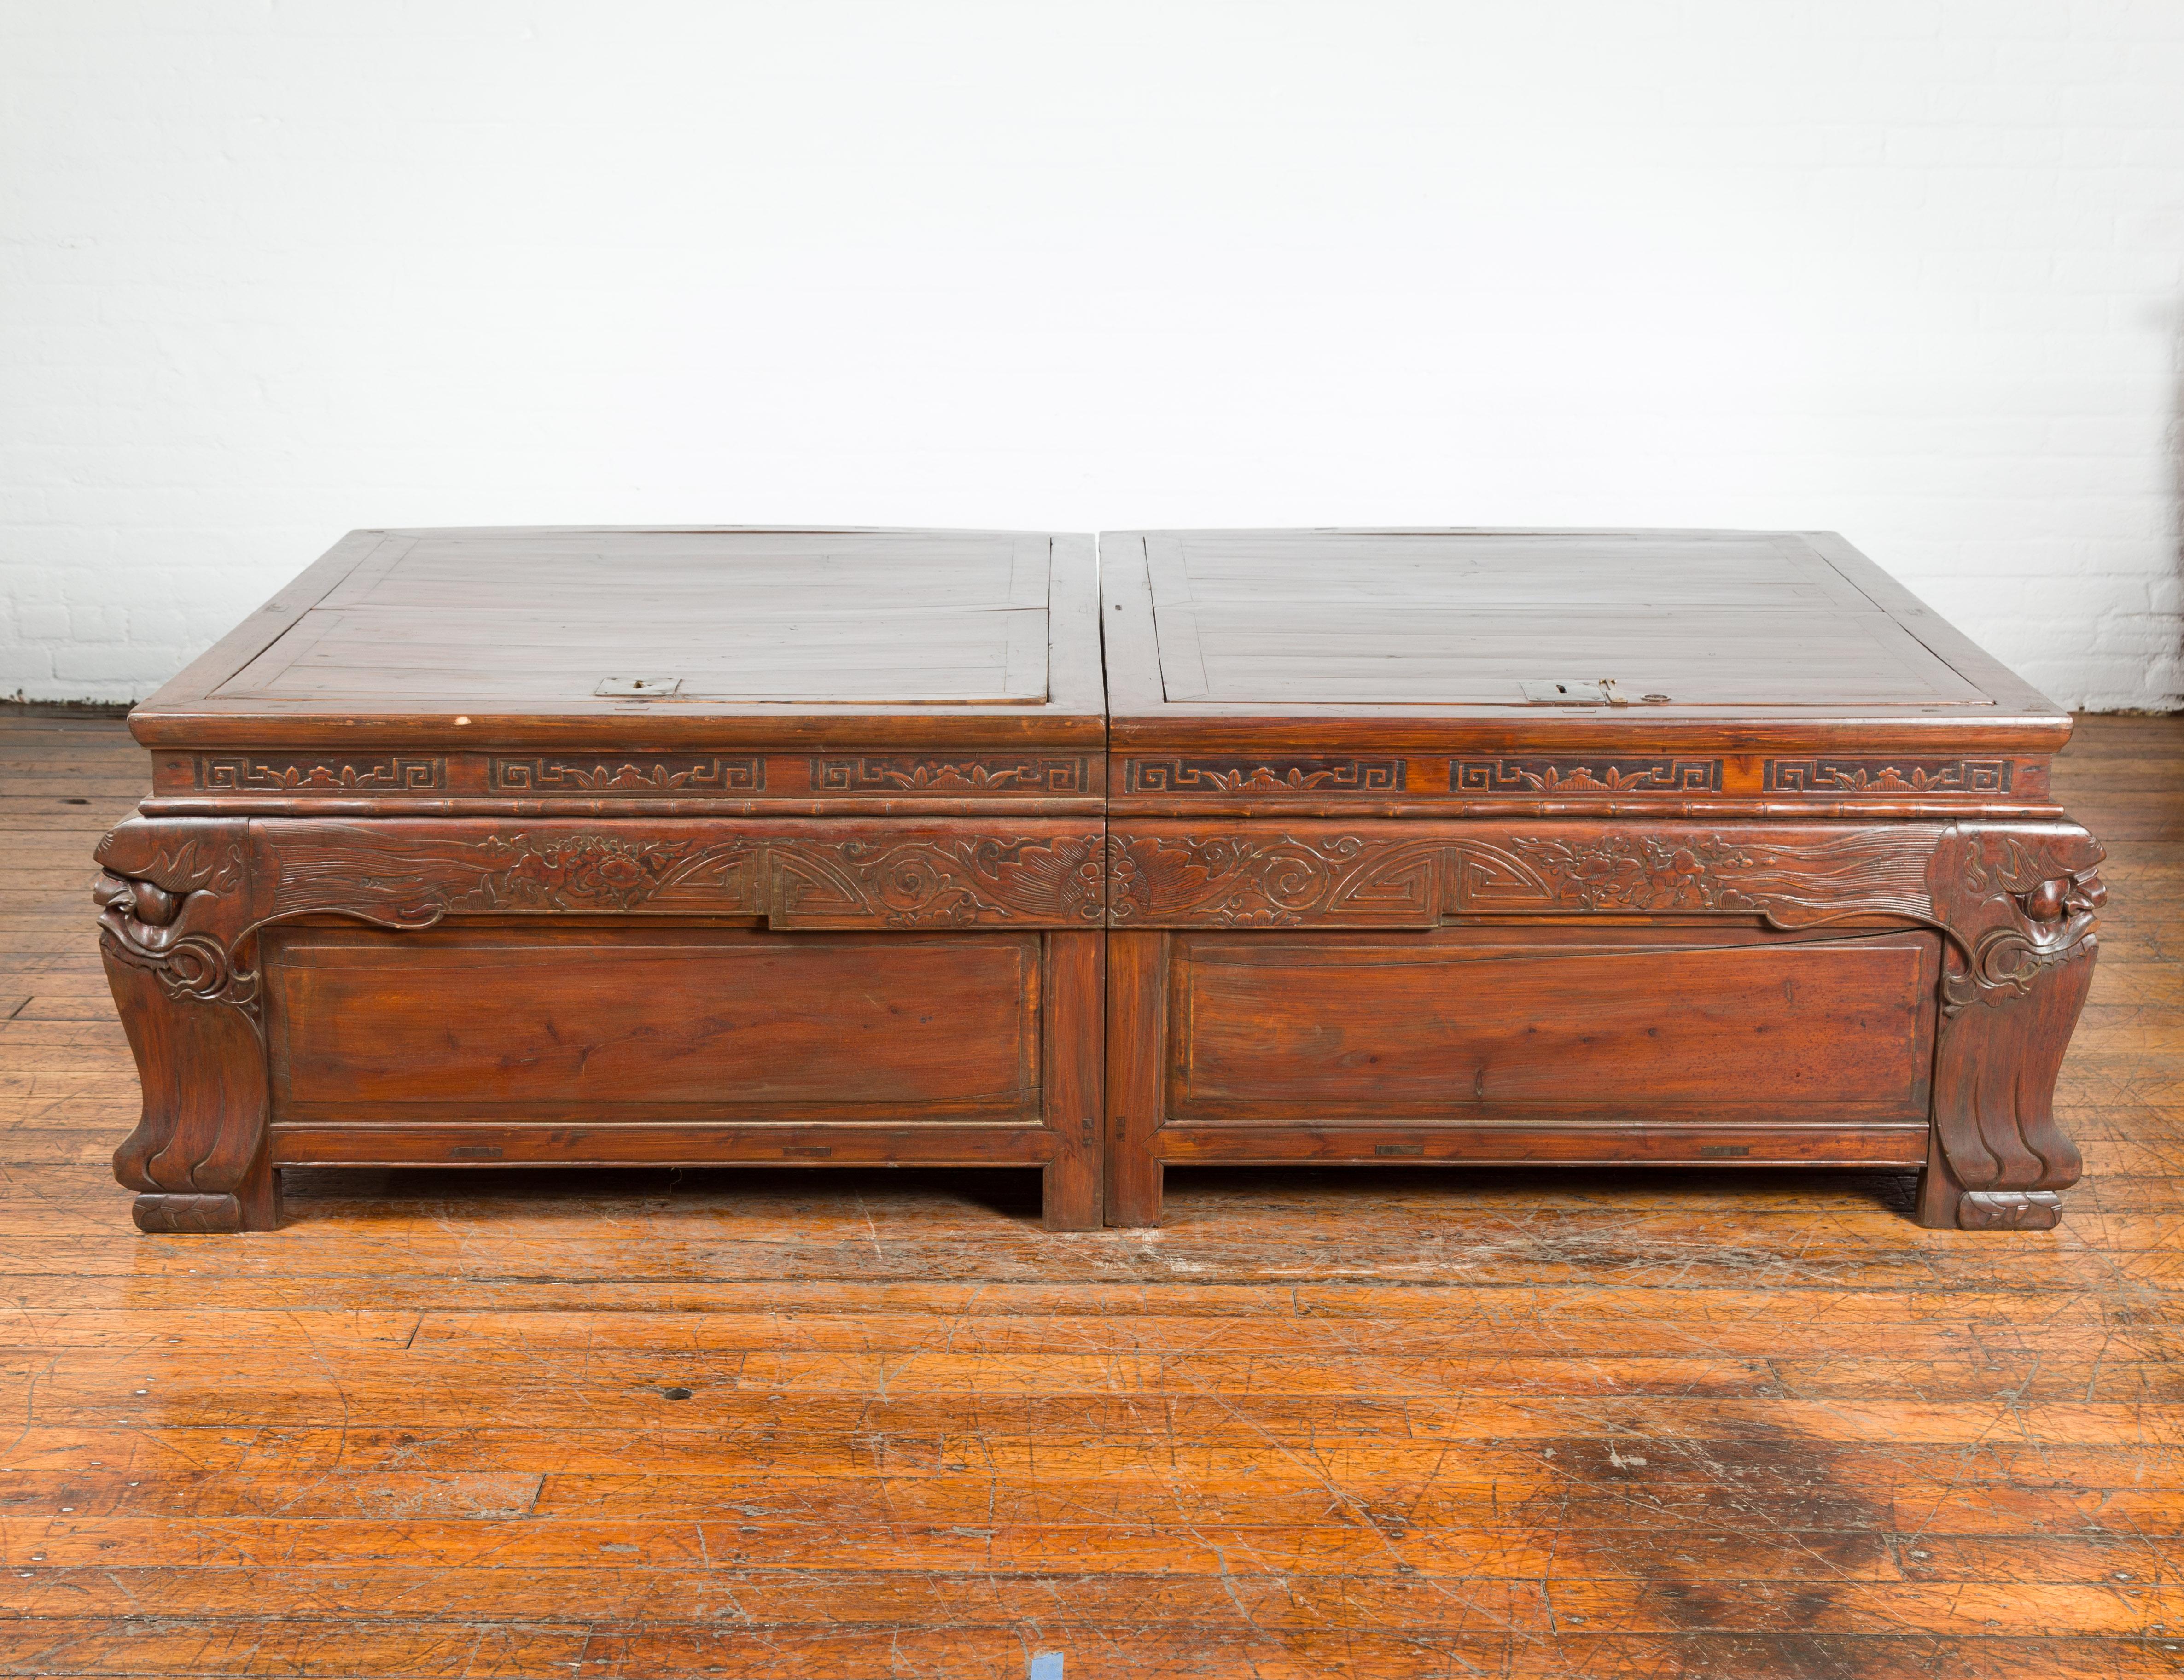 A pair of Chinese antique unusual chests with locks and carved legs from the 19th century, made into a coffee table. Created in China during the 19th century, these unusual chests can be put together to create a long coffee table. Adorned with